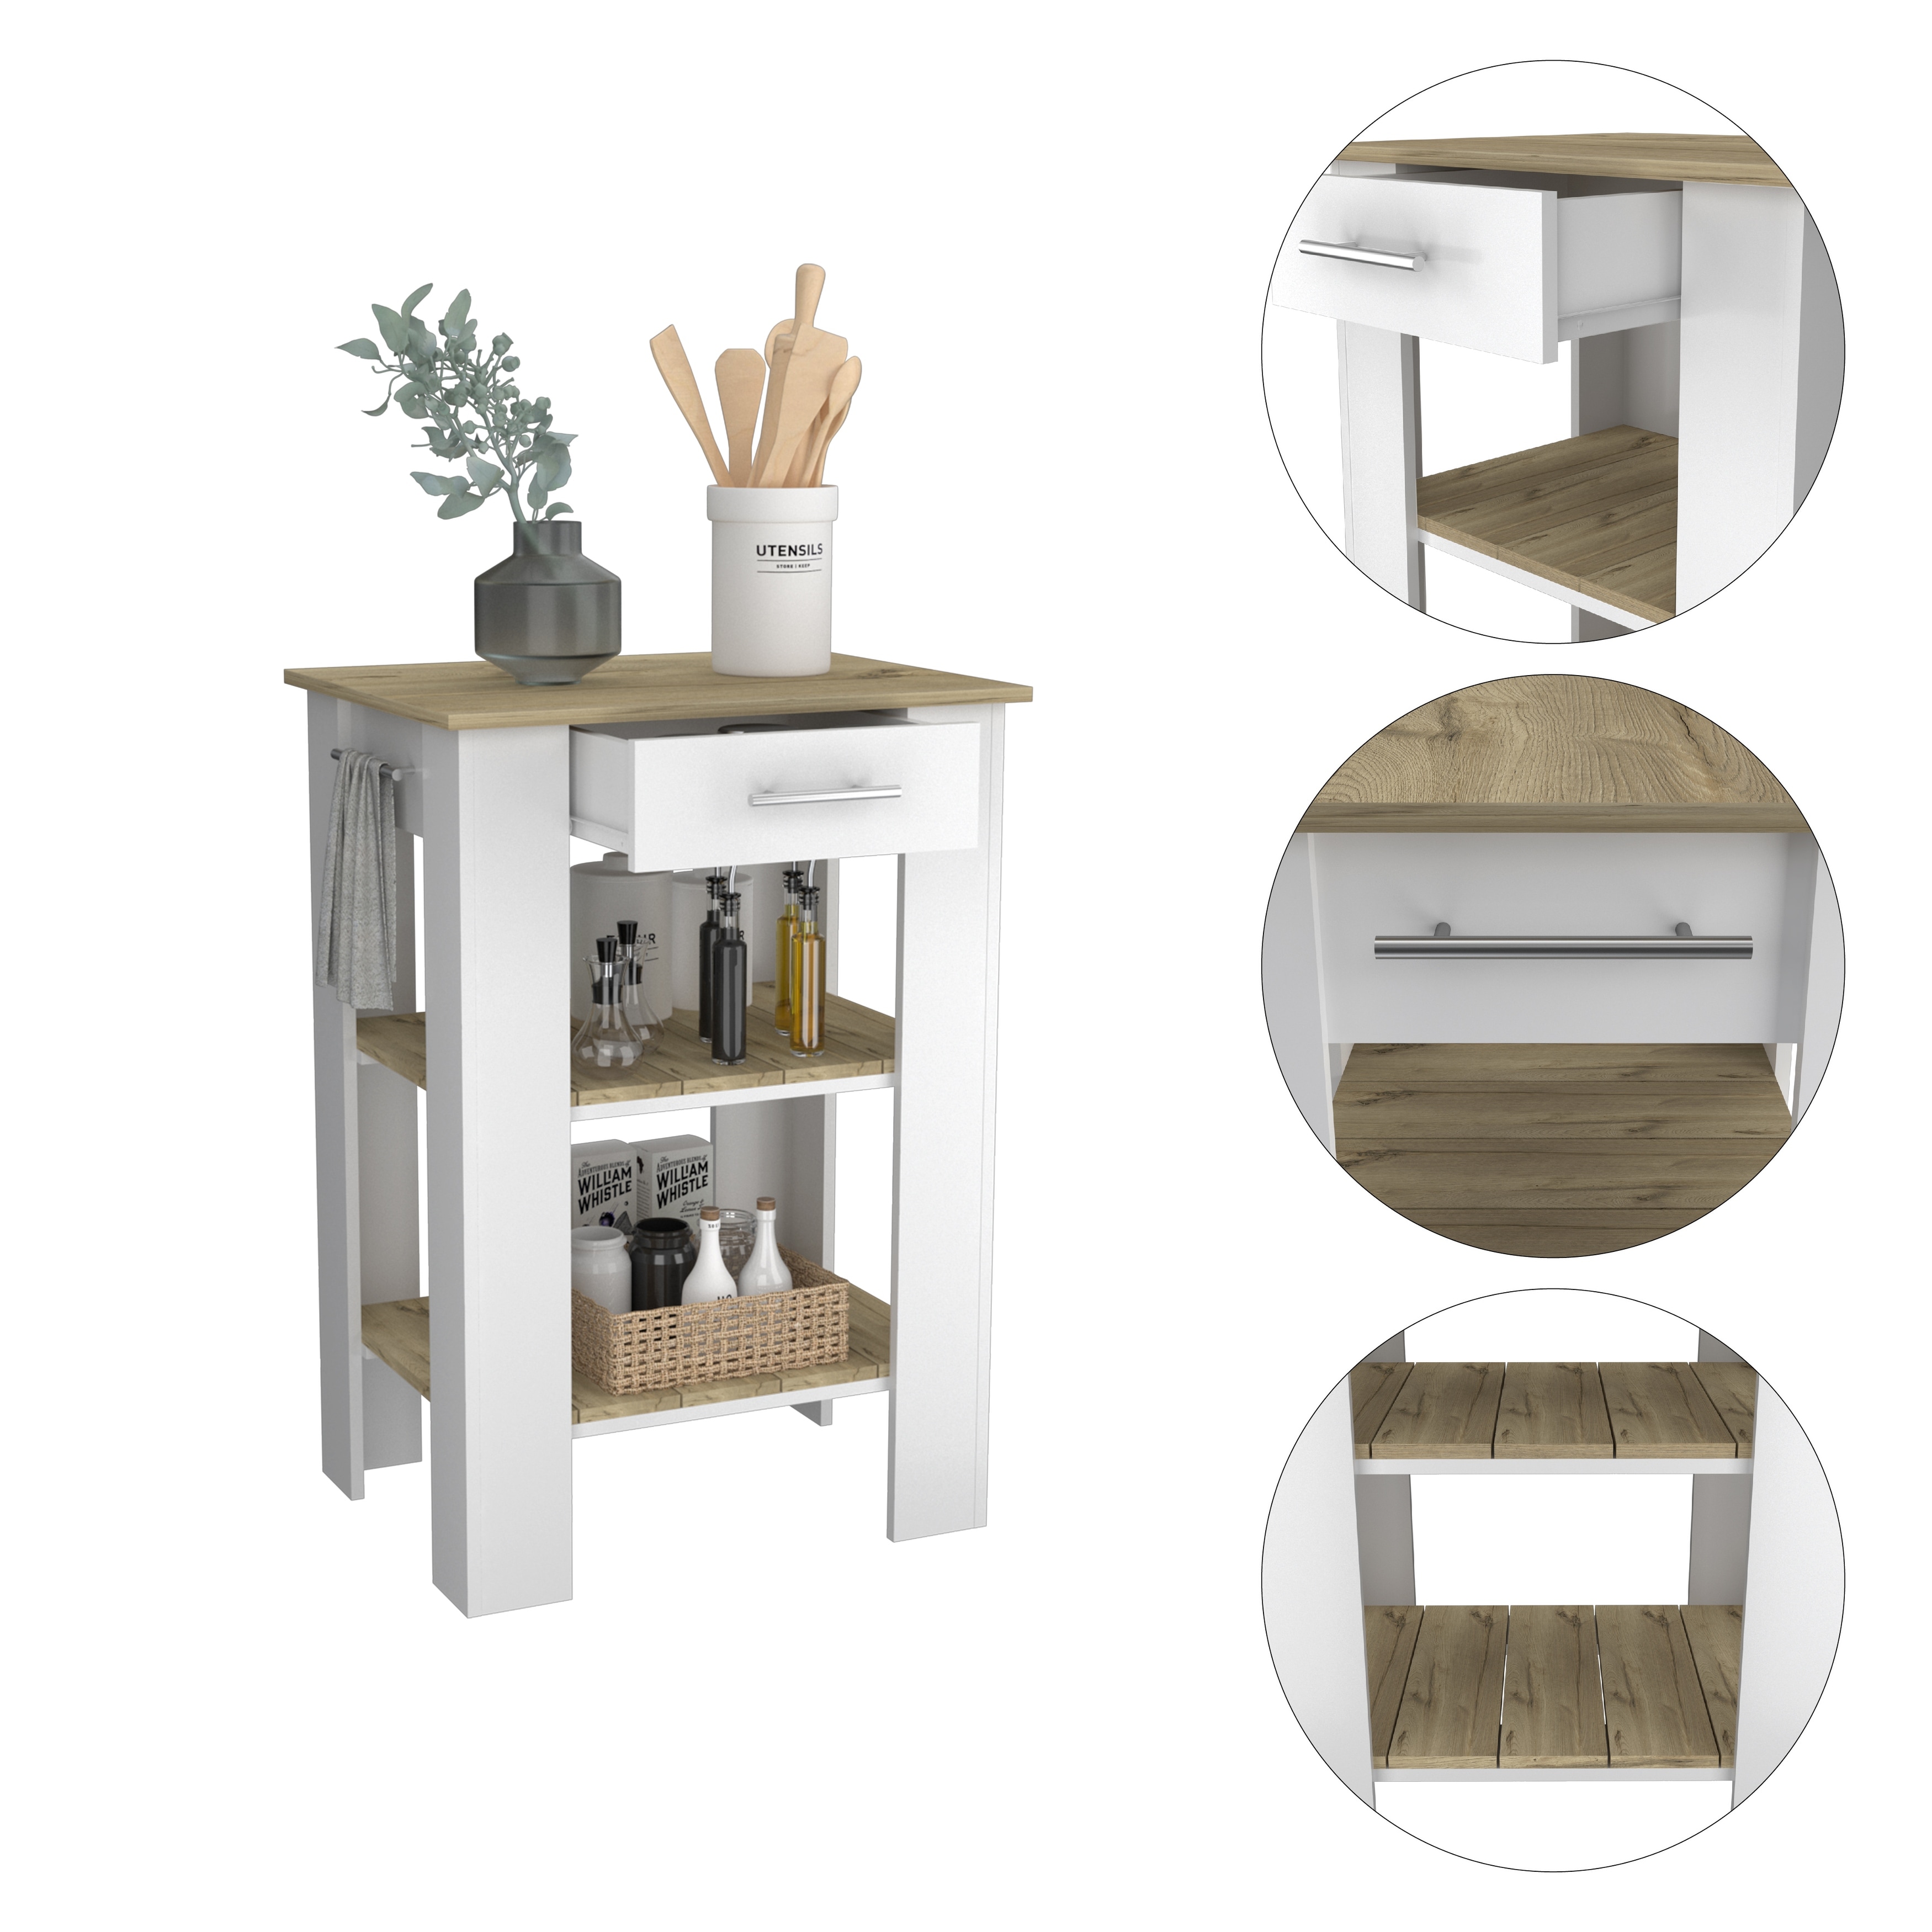 - Sofa On Storage Modern Tables w/ Shelves Nightstands - & Sale Drawers Bed Layer 39079429 Side Kitchen Rack Island Snack Chair & Bath Table - Beyond Towel 2 Tables